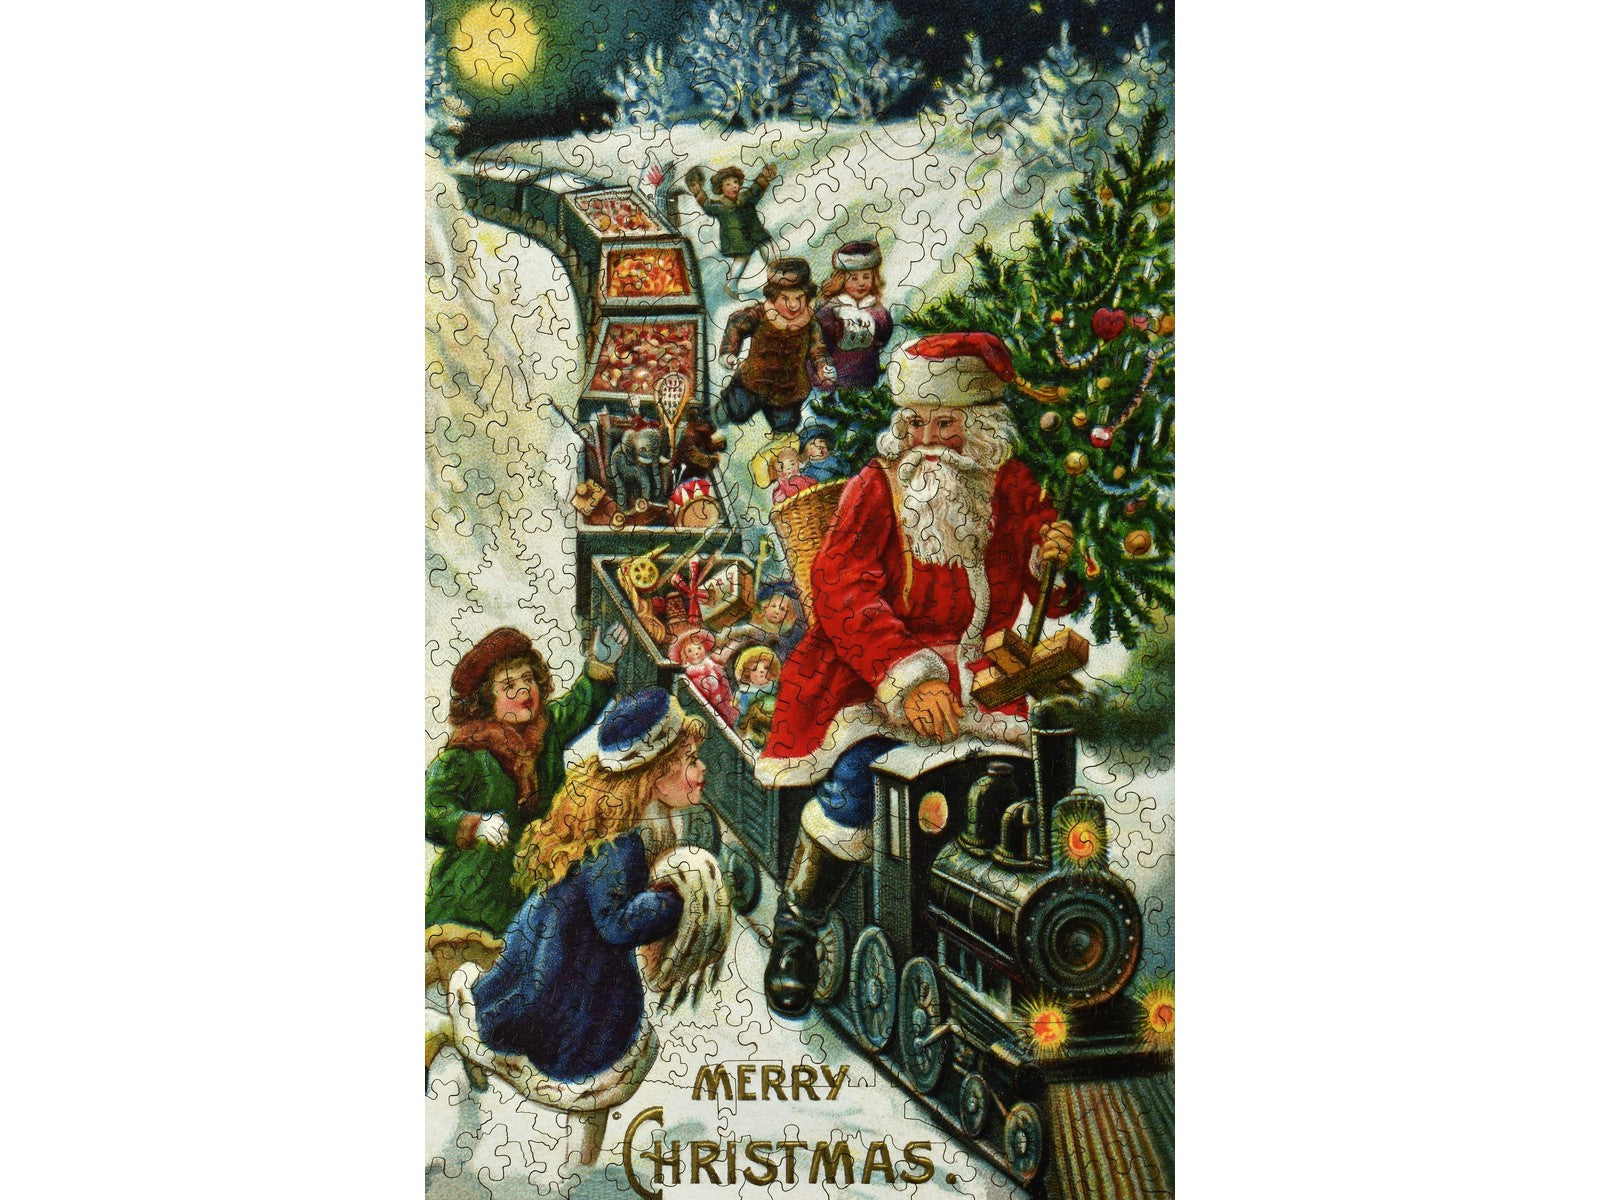 The front of the puzzle, Santa Claus Train, which shows santa driving a train full of presents.